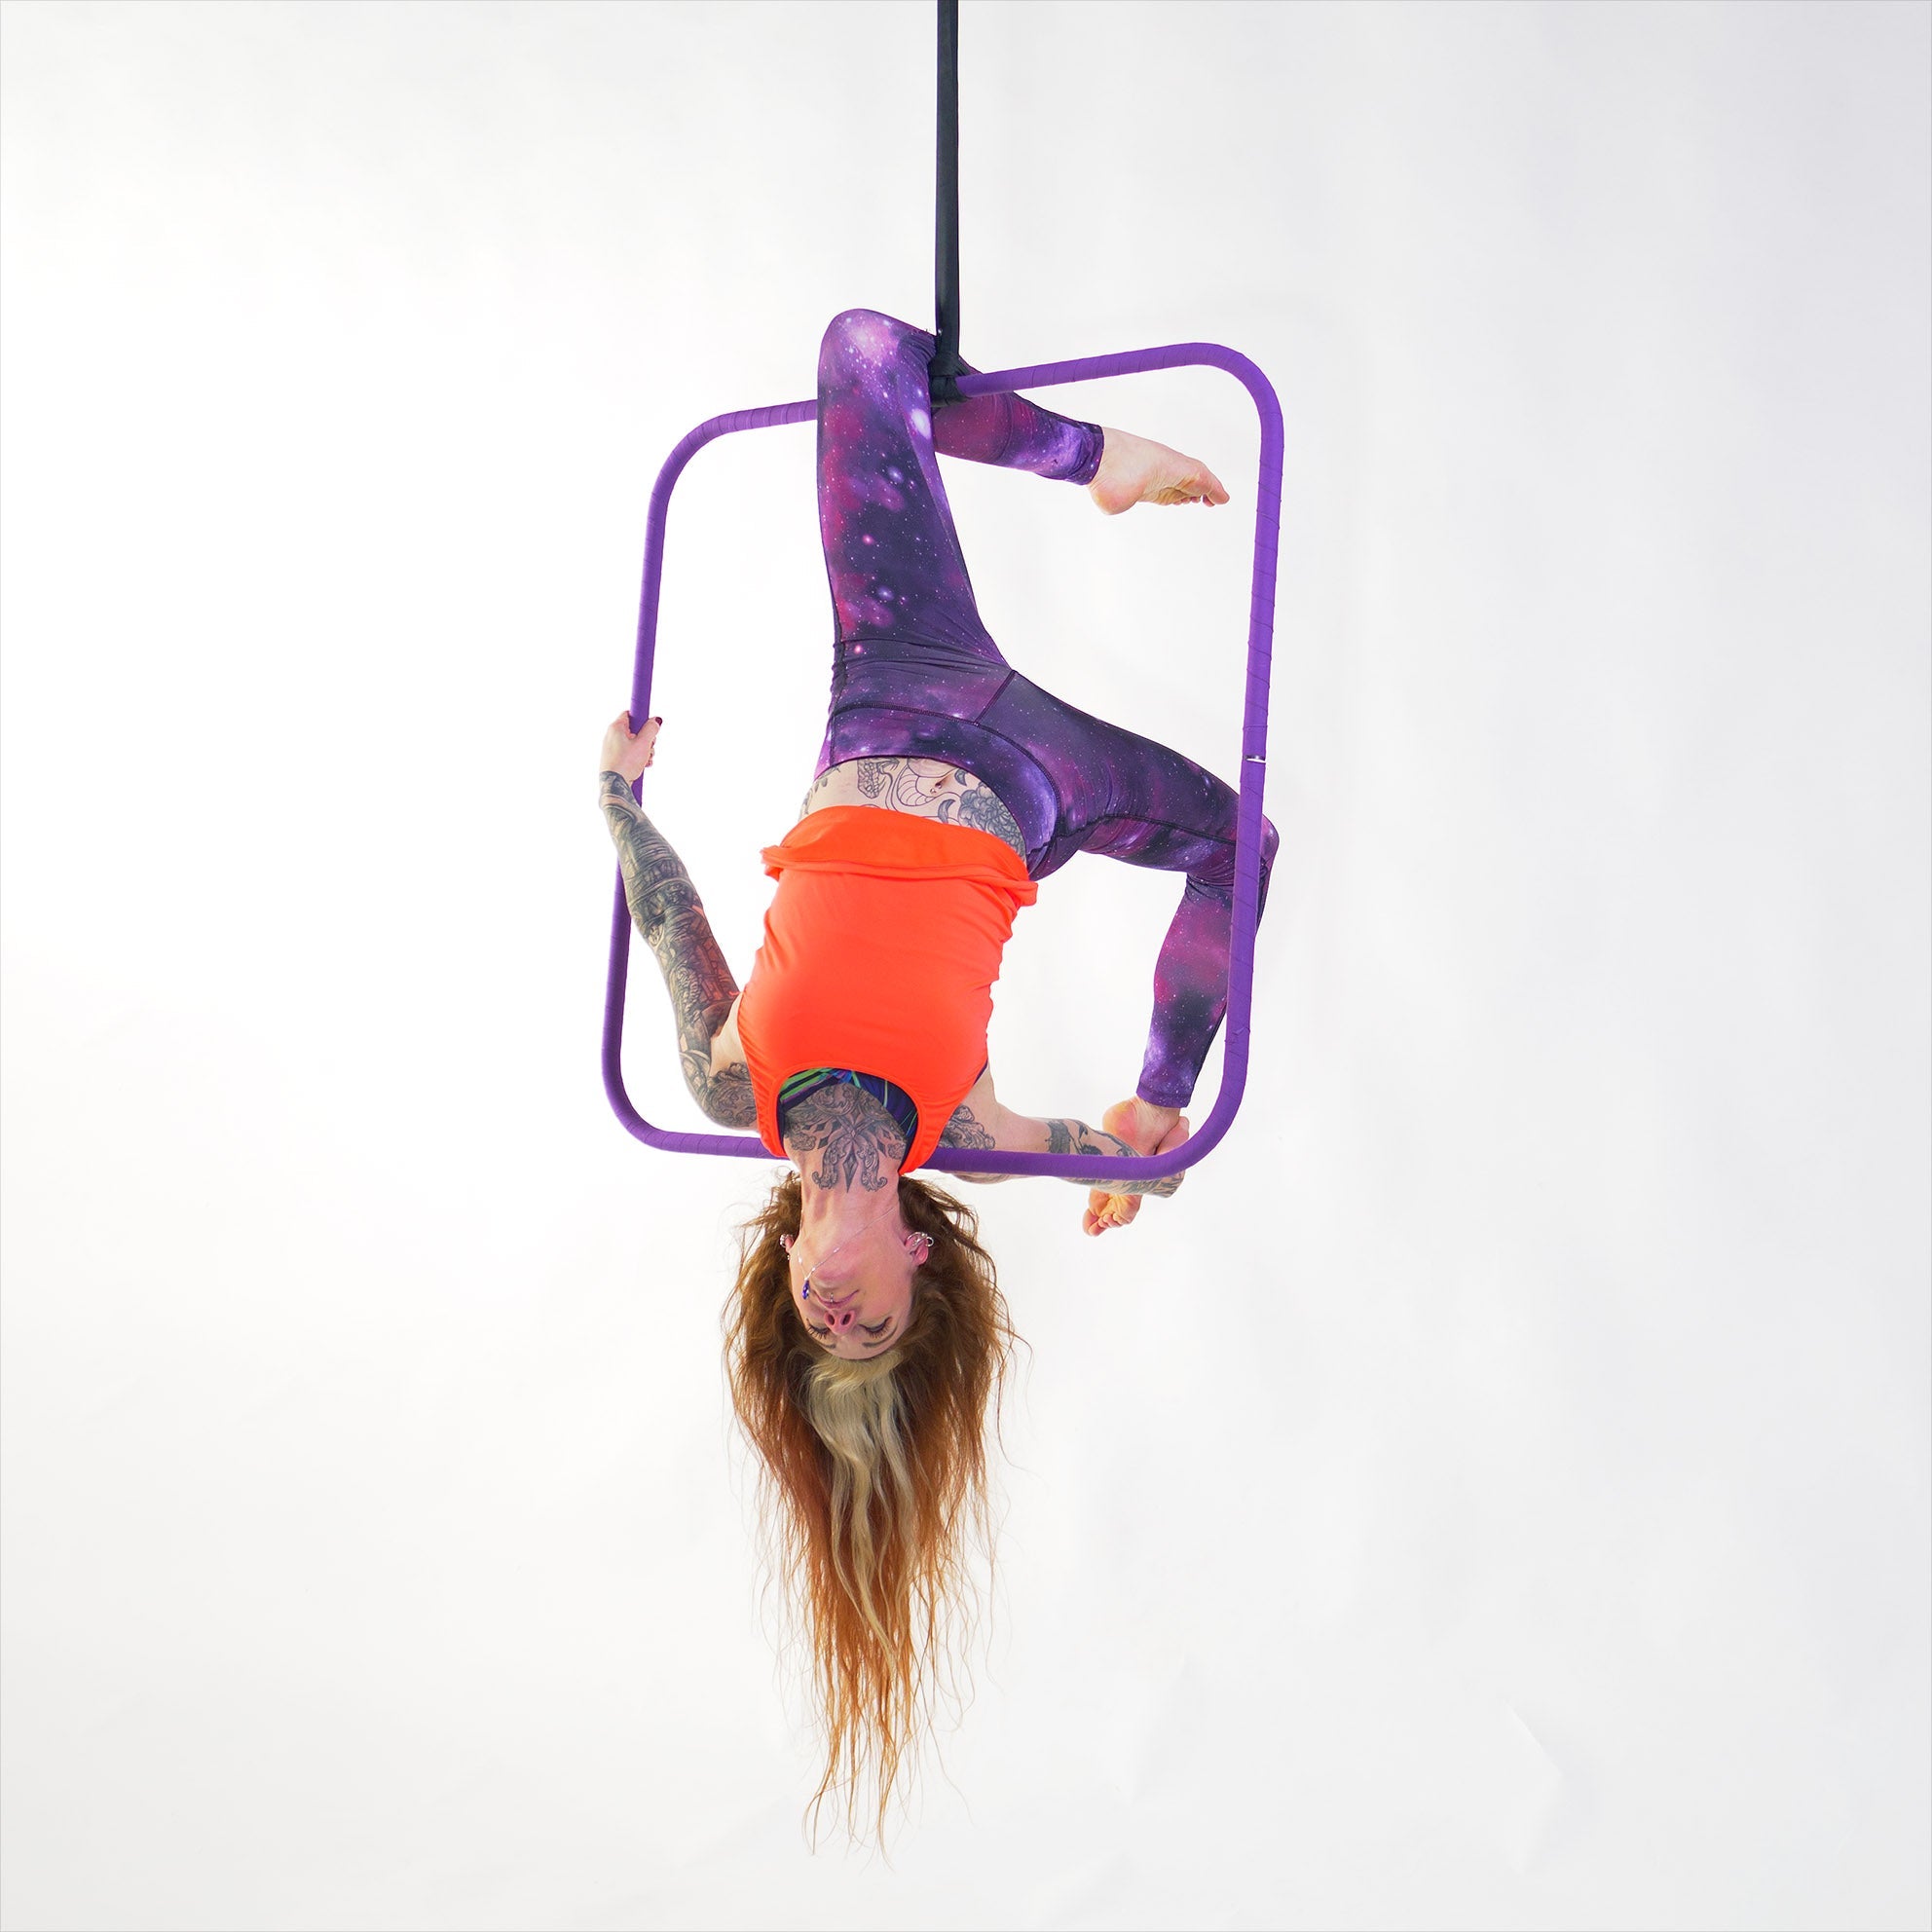 performer in an aerial square